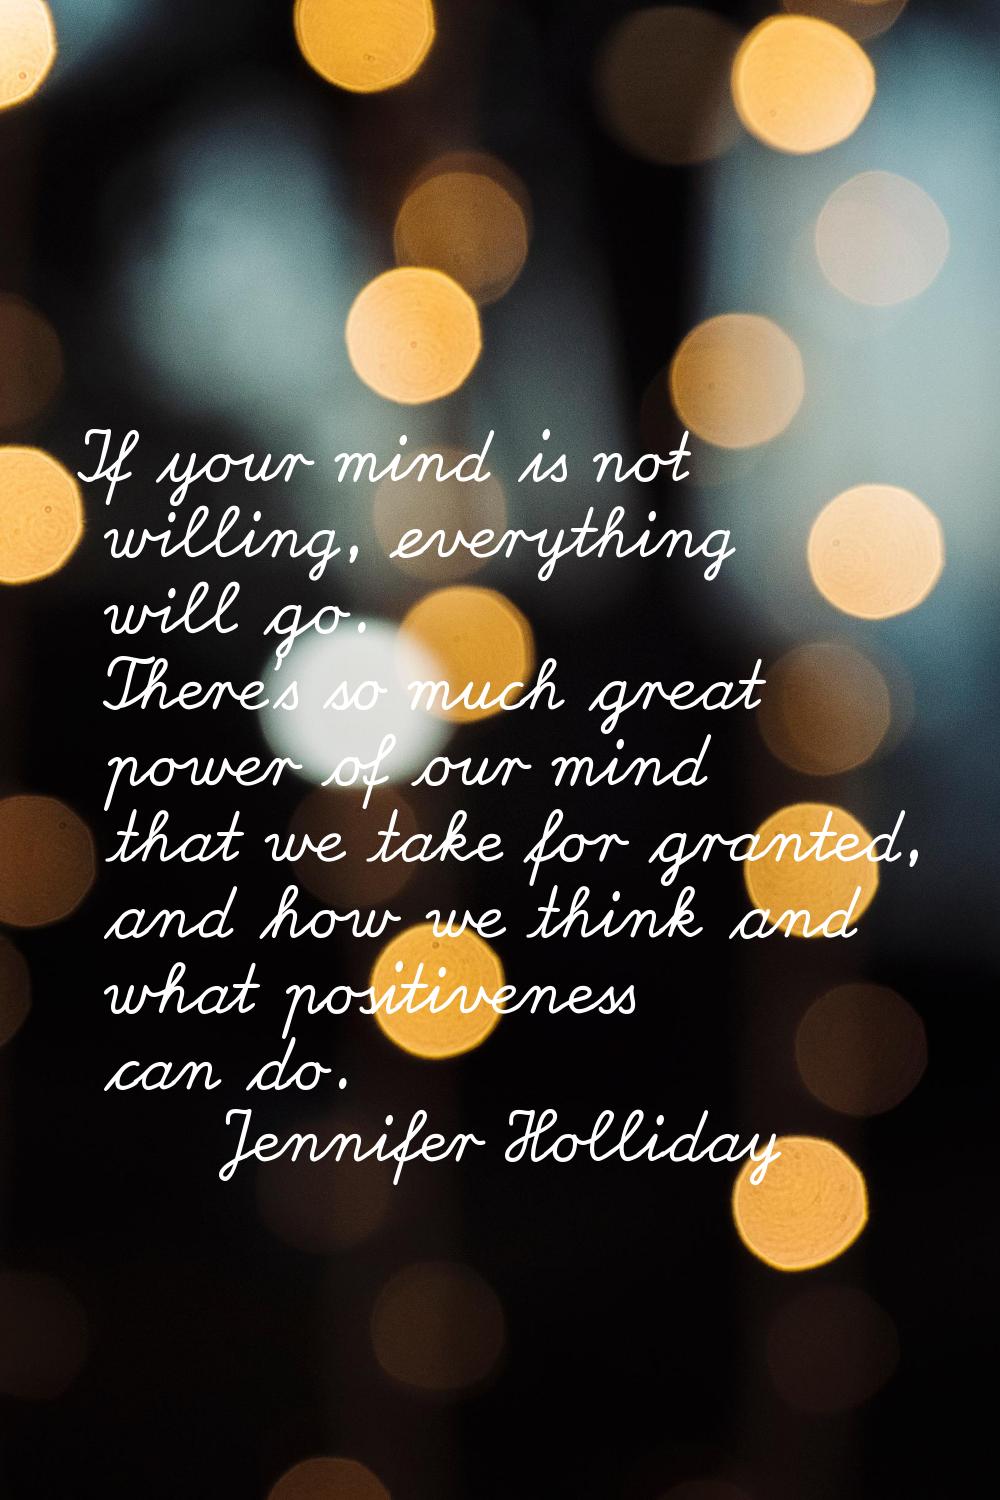 If your mind is not willing, everything will go. There's so much great power of our mind that we ta